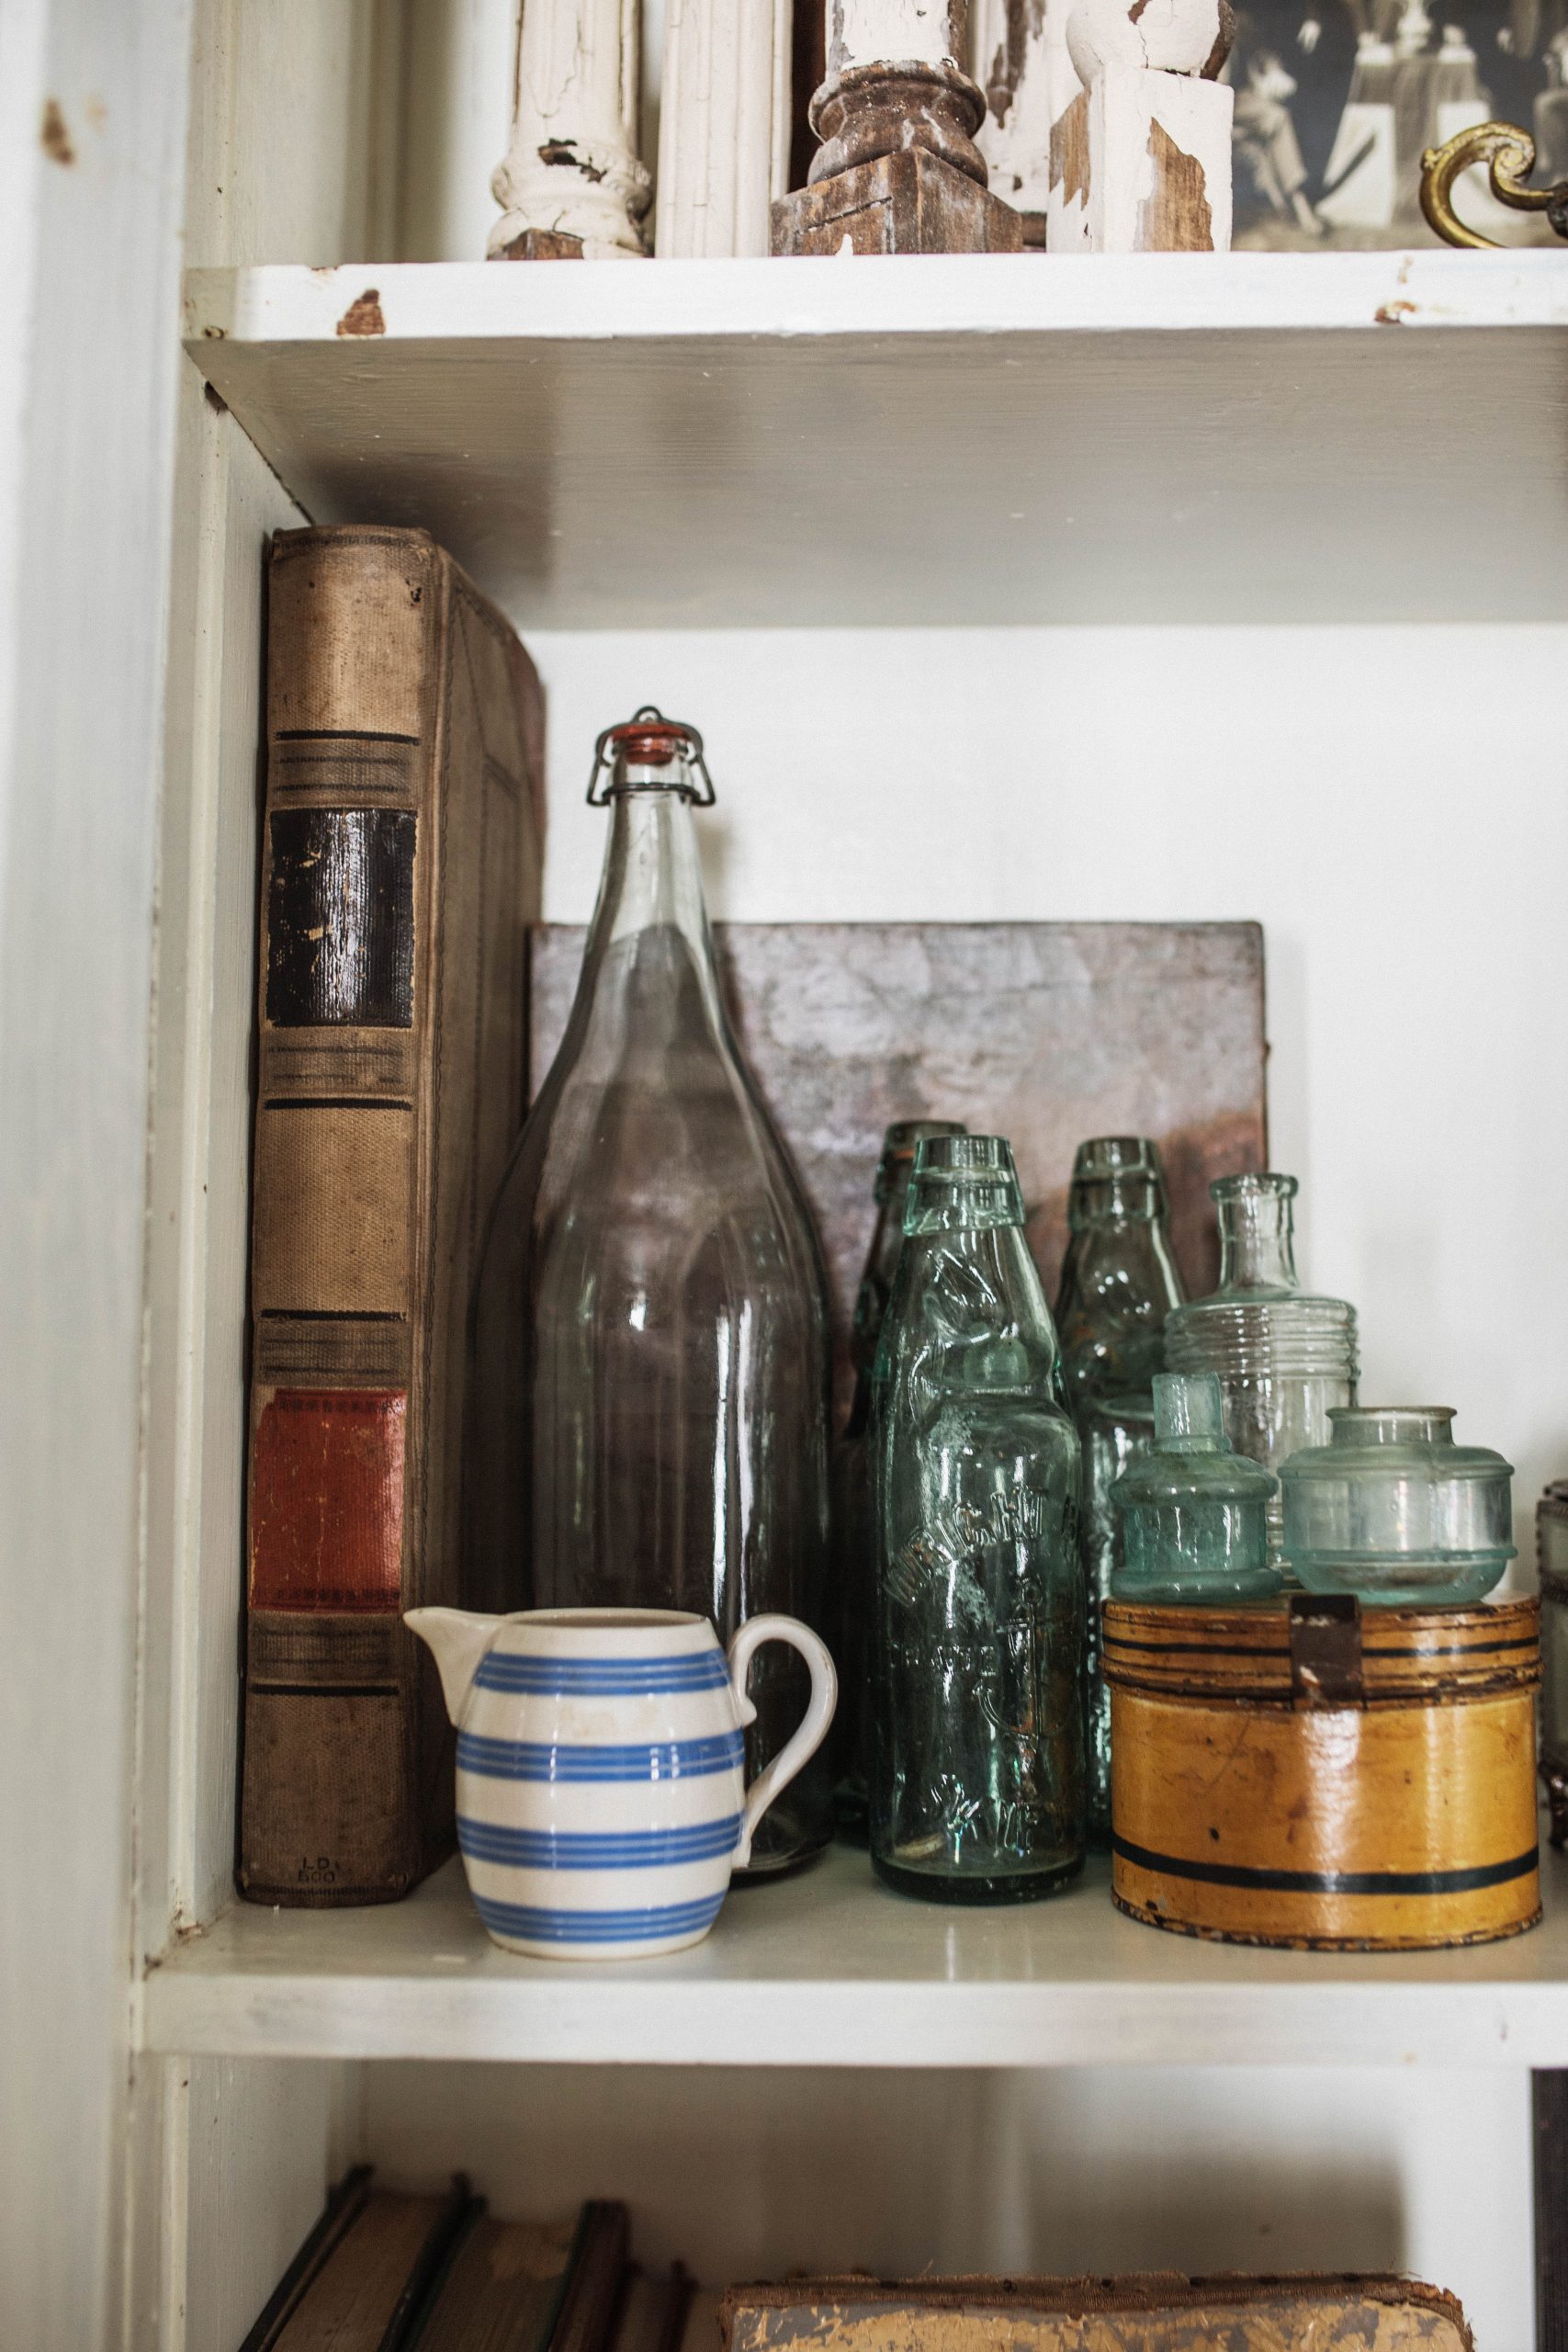 How to make a Vintage display without the clutter